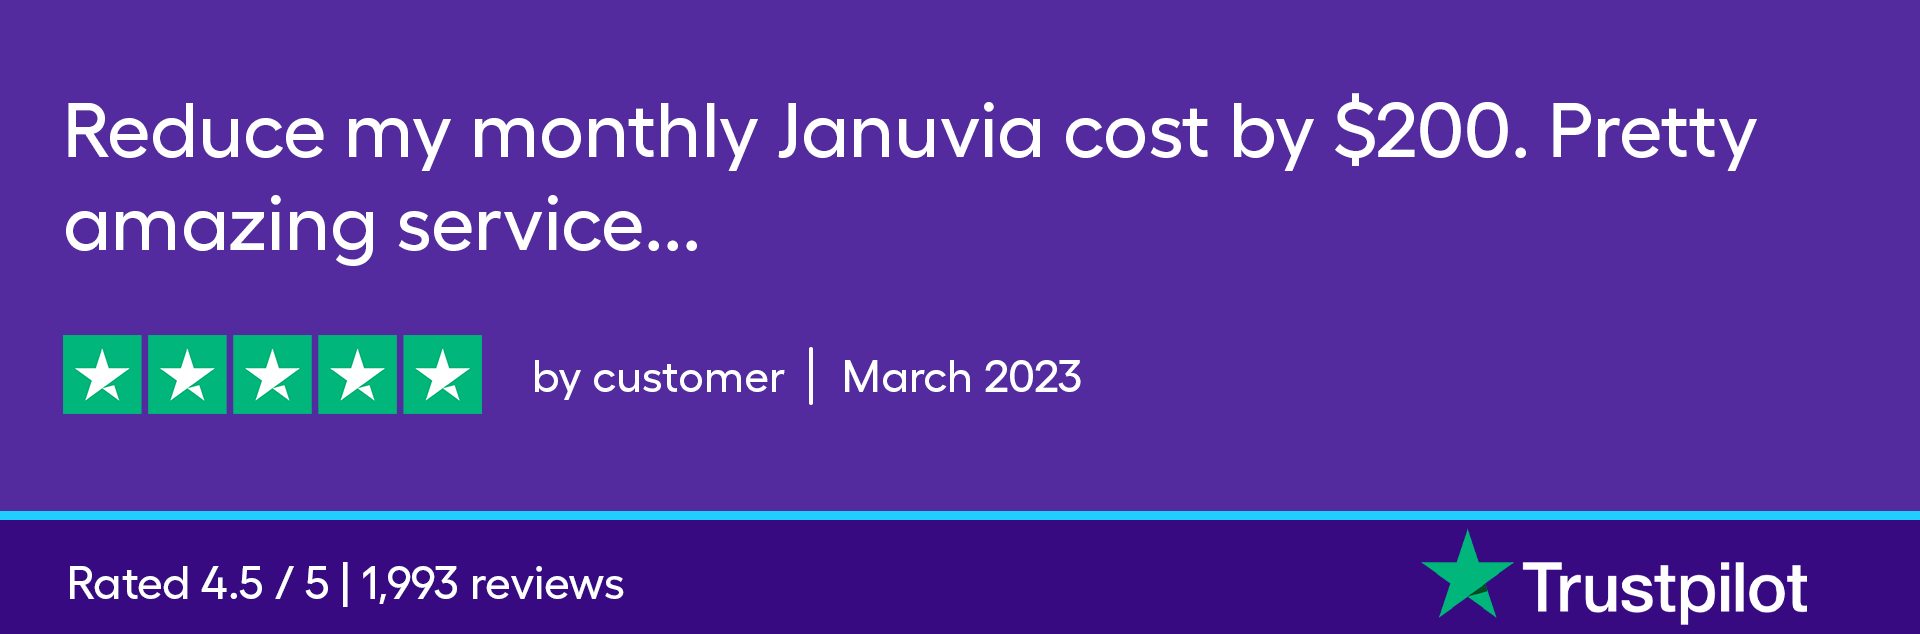 Reduce my monthly Januvia cost by $200. Pretty amazing service...